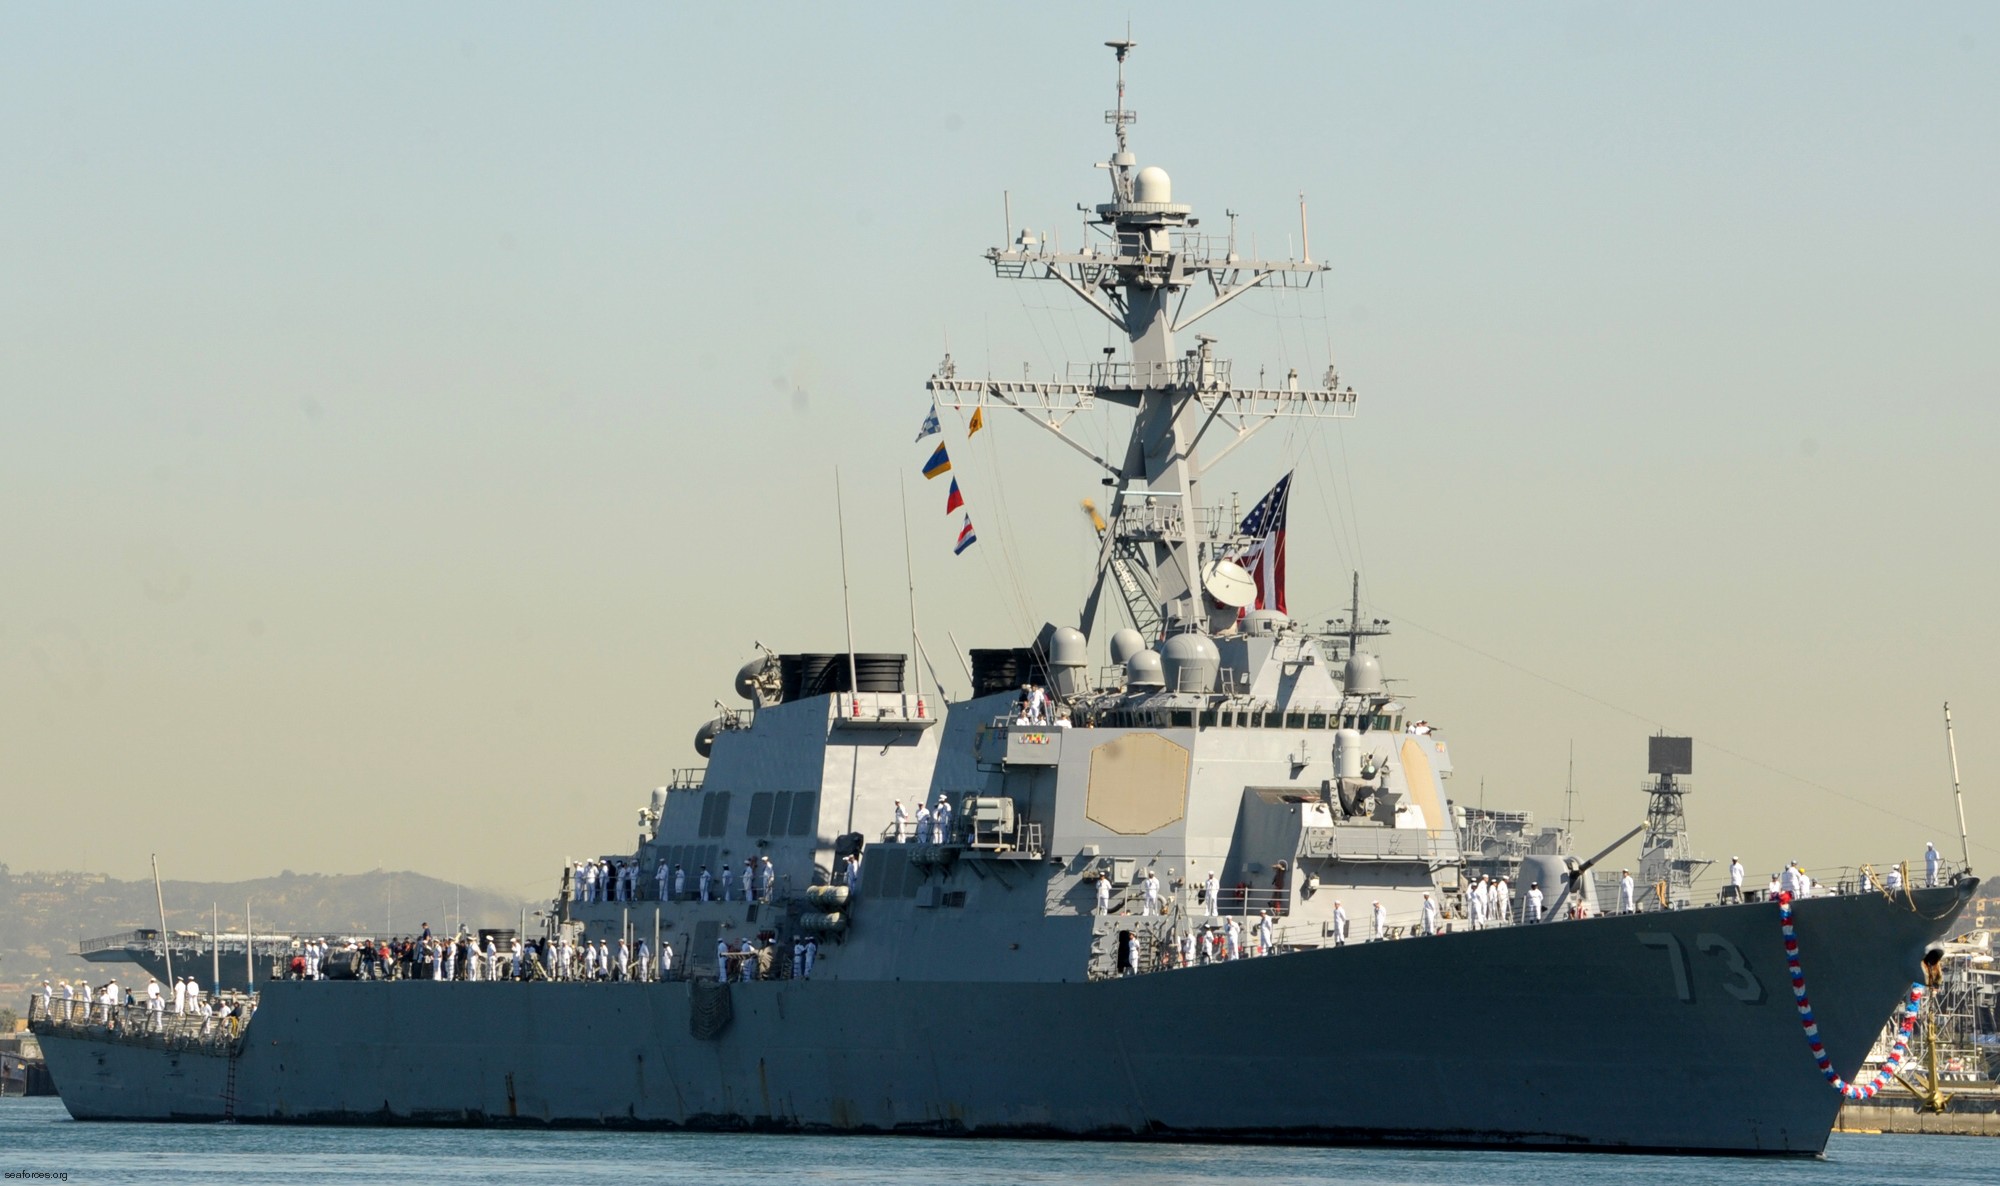 ddg-73 uss decatur guided missile destroyer arleigh burke class aegis bmd 21